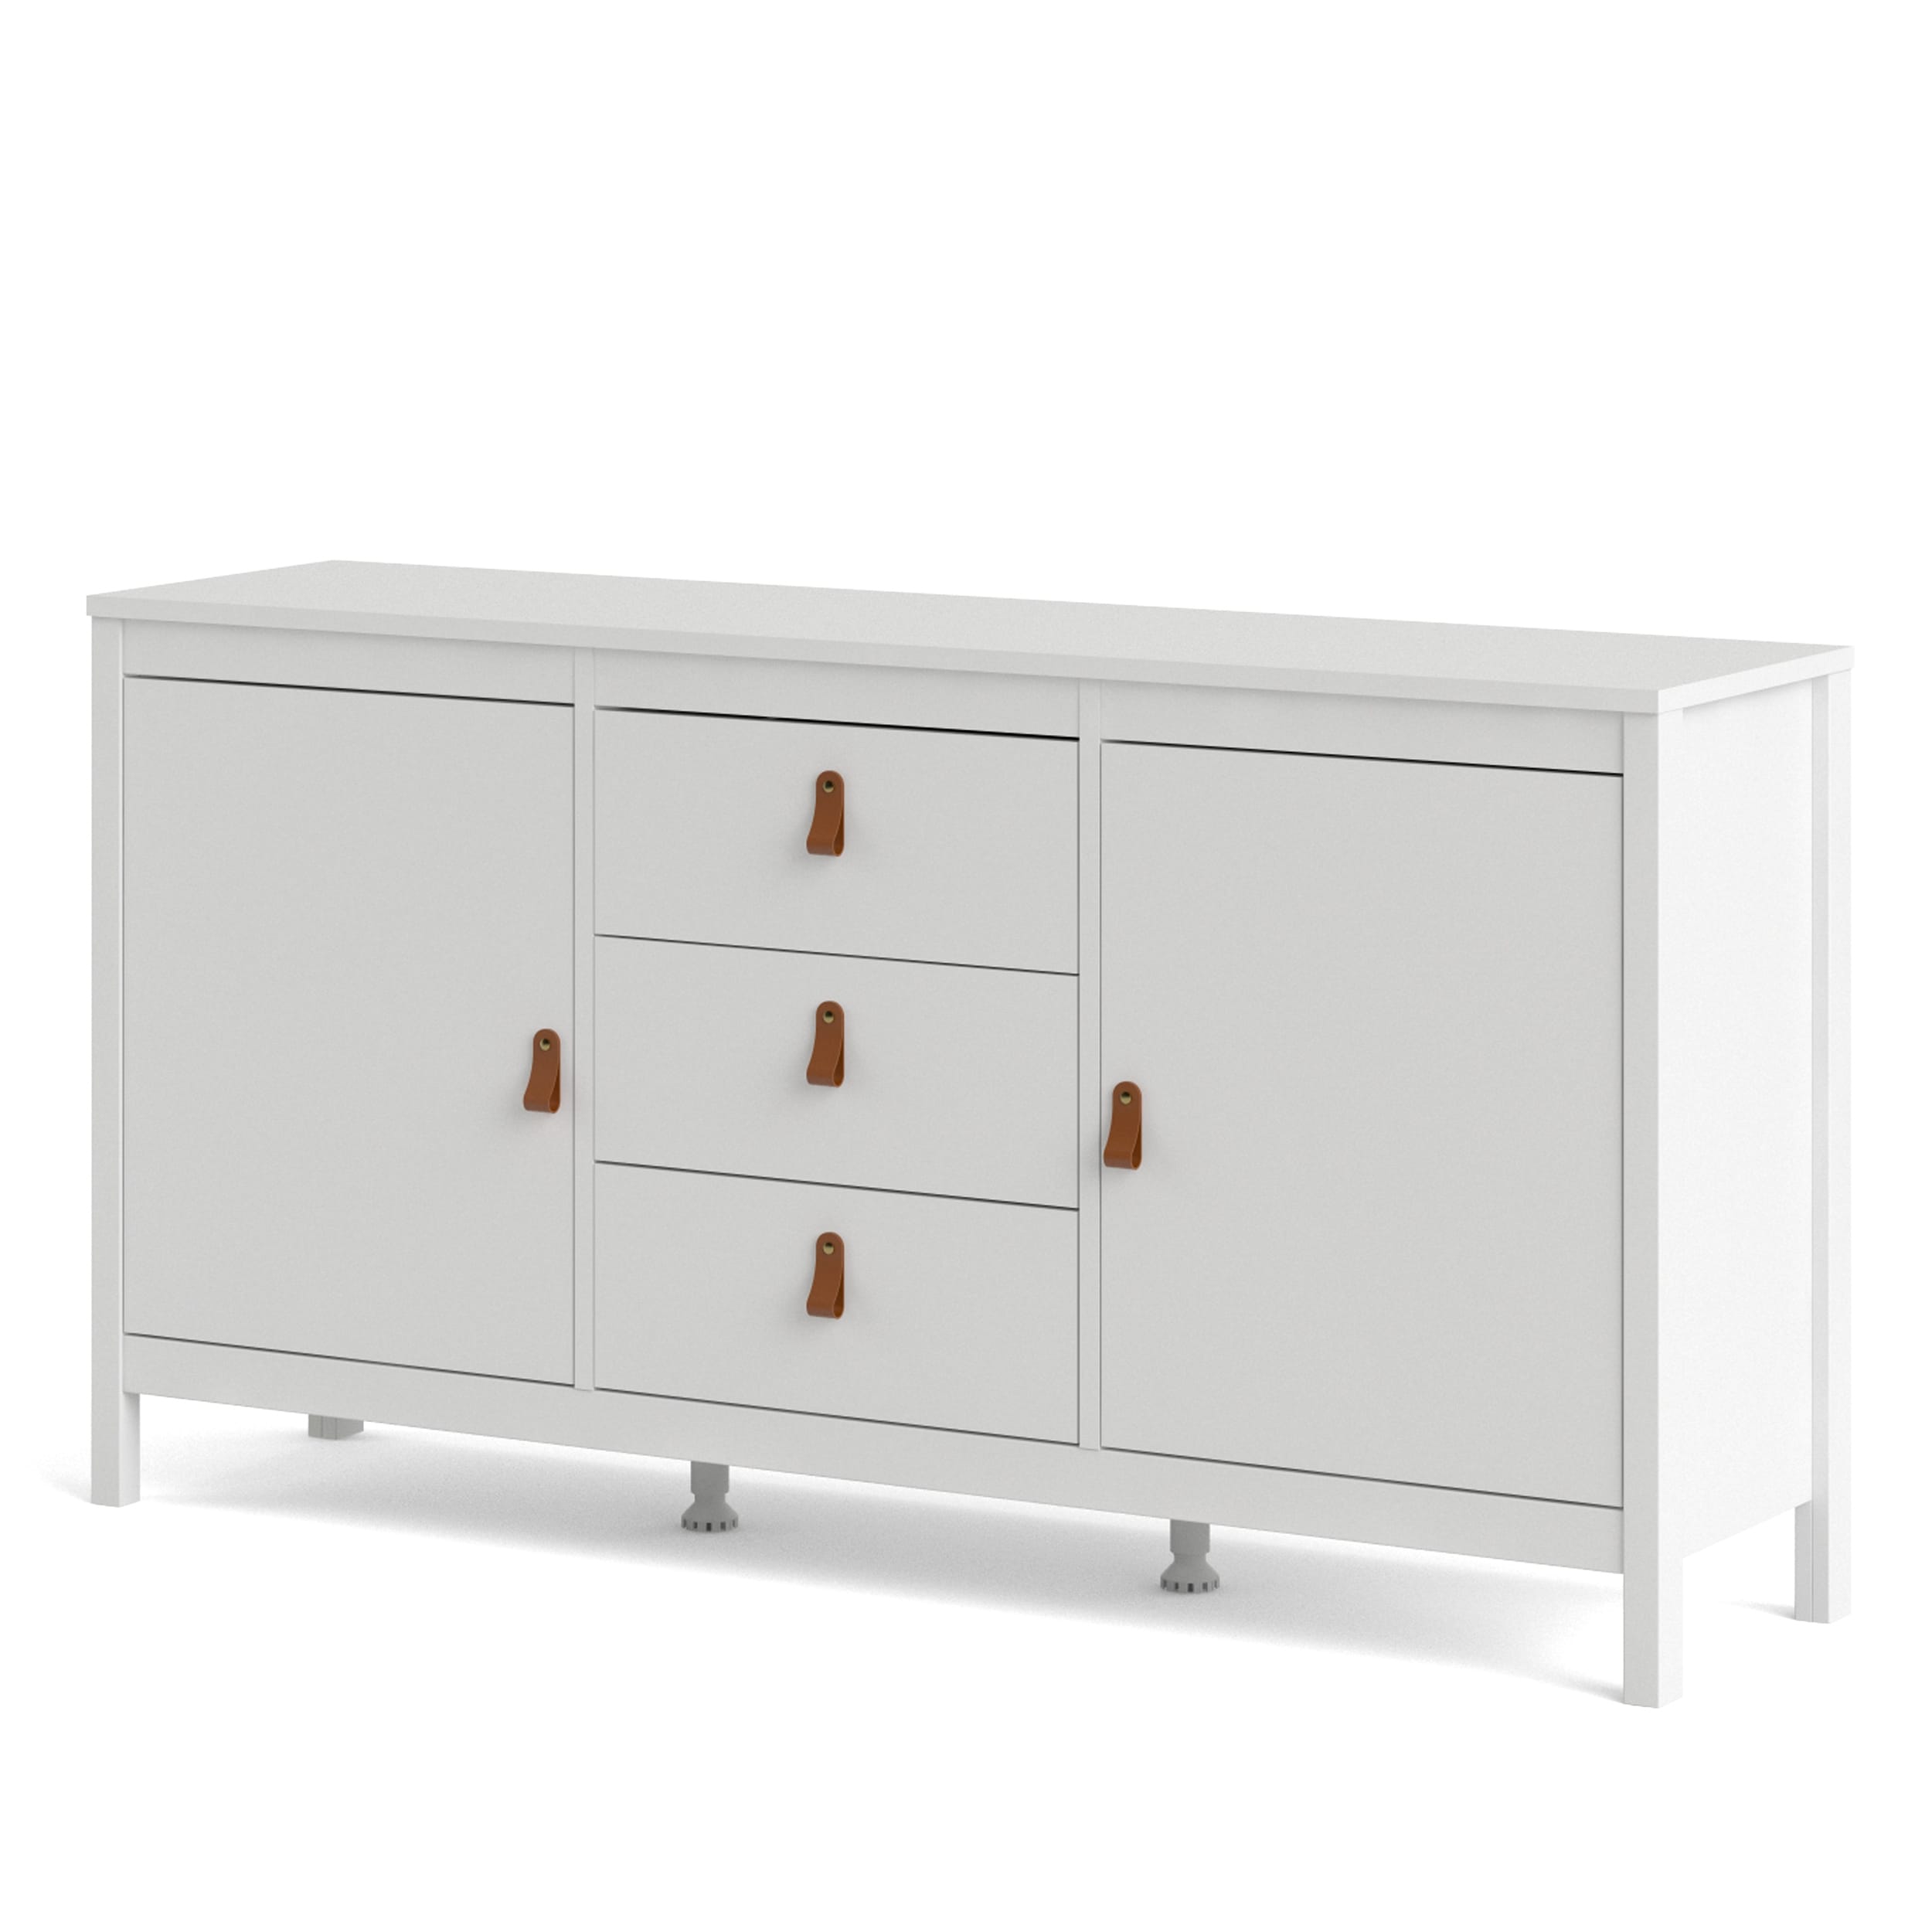 Madrid Beyond Porch 33673465 Bath Den On & - - with - Bed & Sale 3-Drawers 2-Door Sideboard